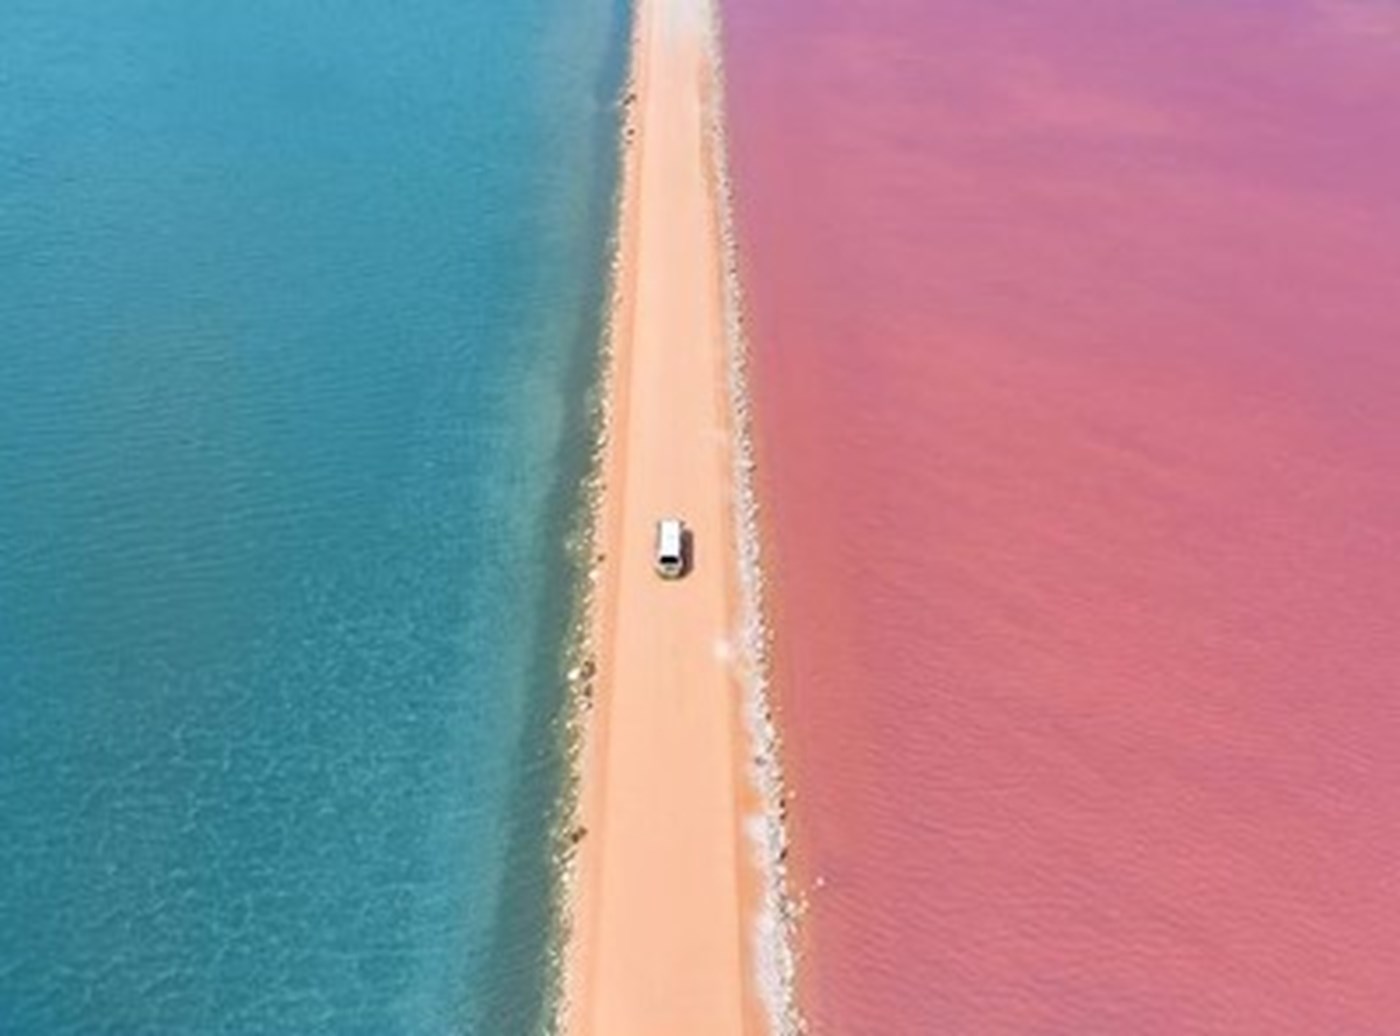 A car drives through a dirt road, framed by a blue lake on one side and a pink lake on the other.